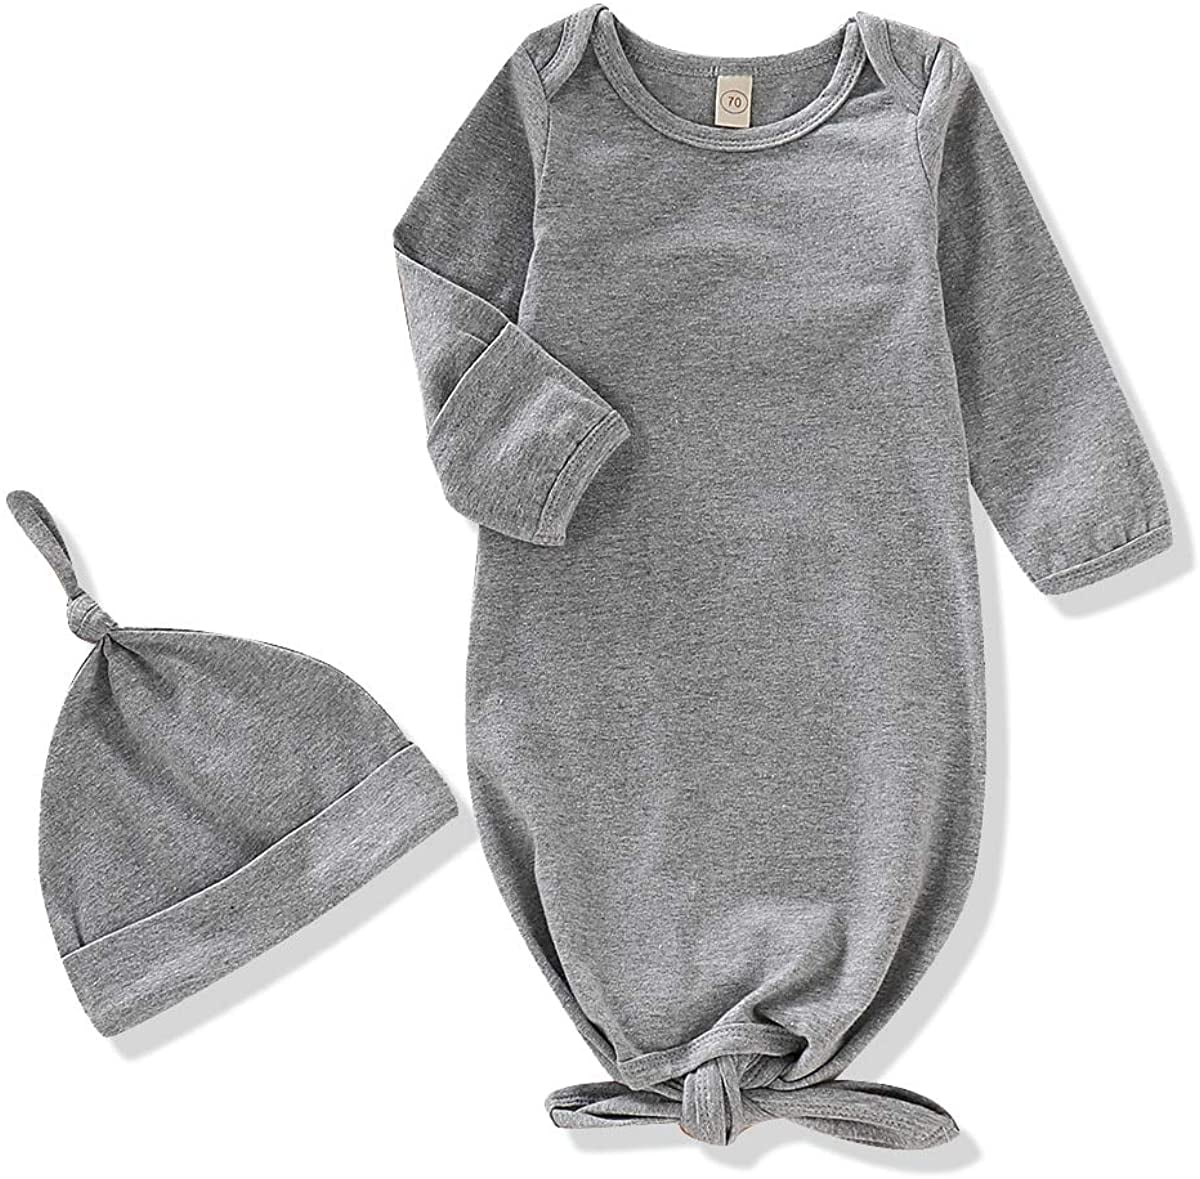 Infant Gown, Knitted with Elastic Bottom, 0-6 Month